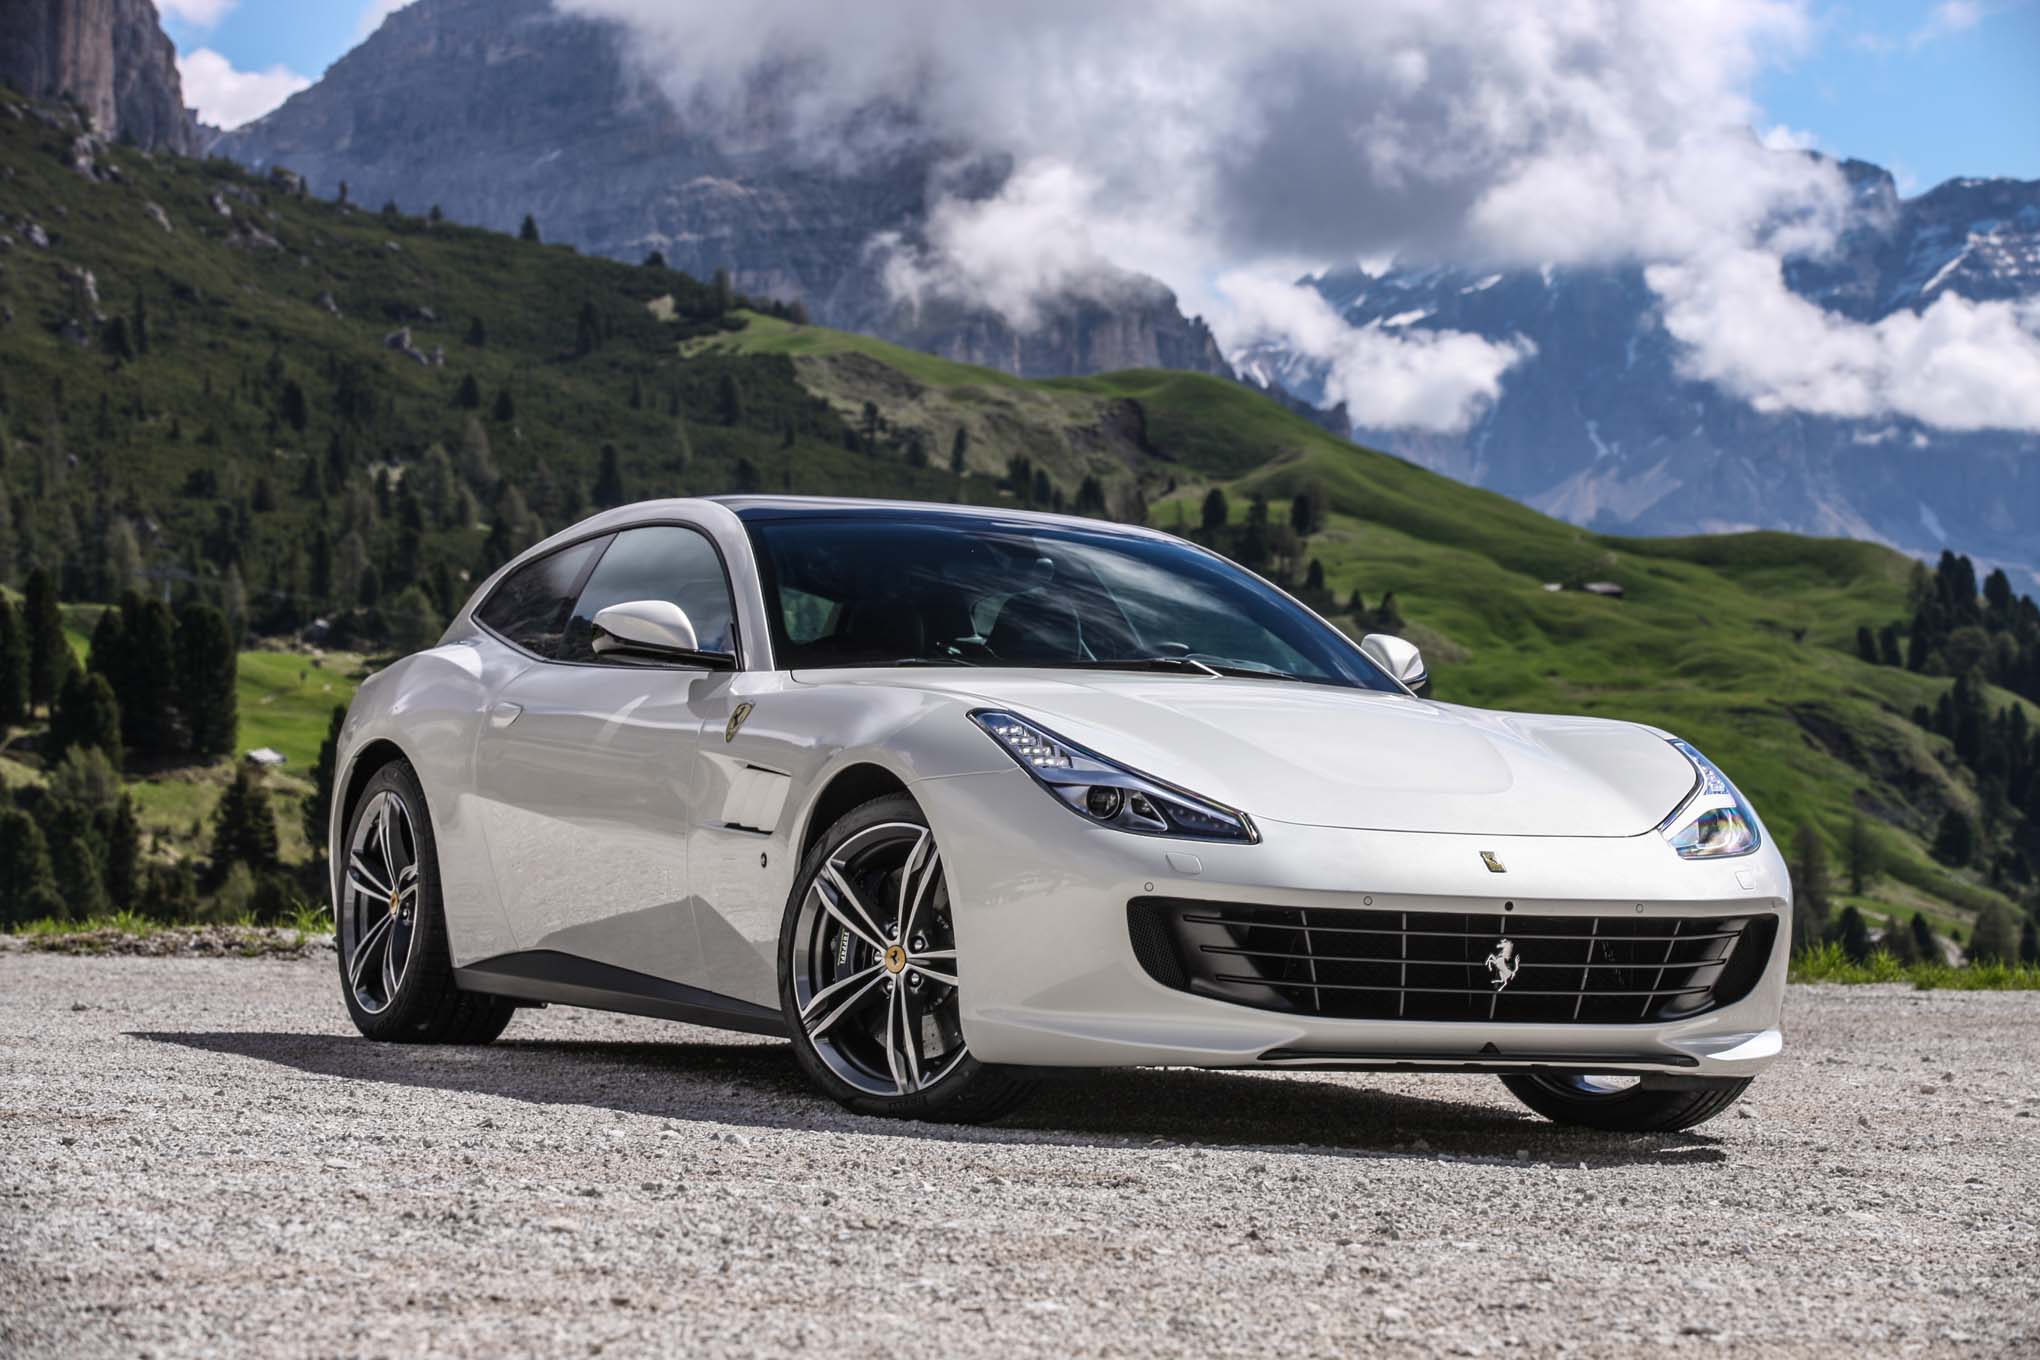 Ferrari Cars, Convertible, Coupe, Hatchback: Reviews & Prices